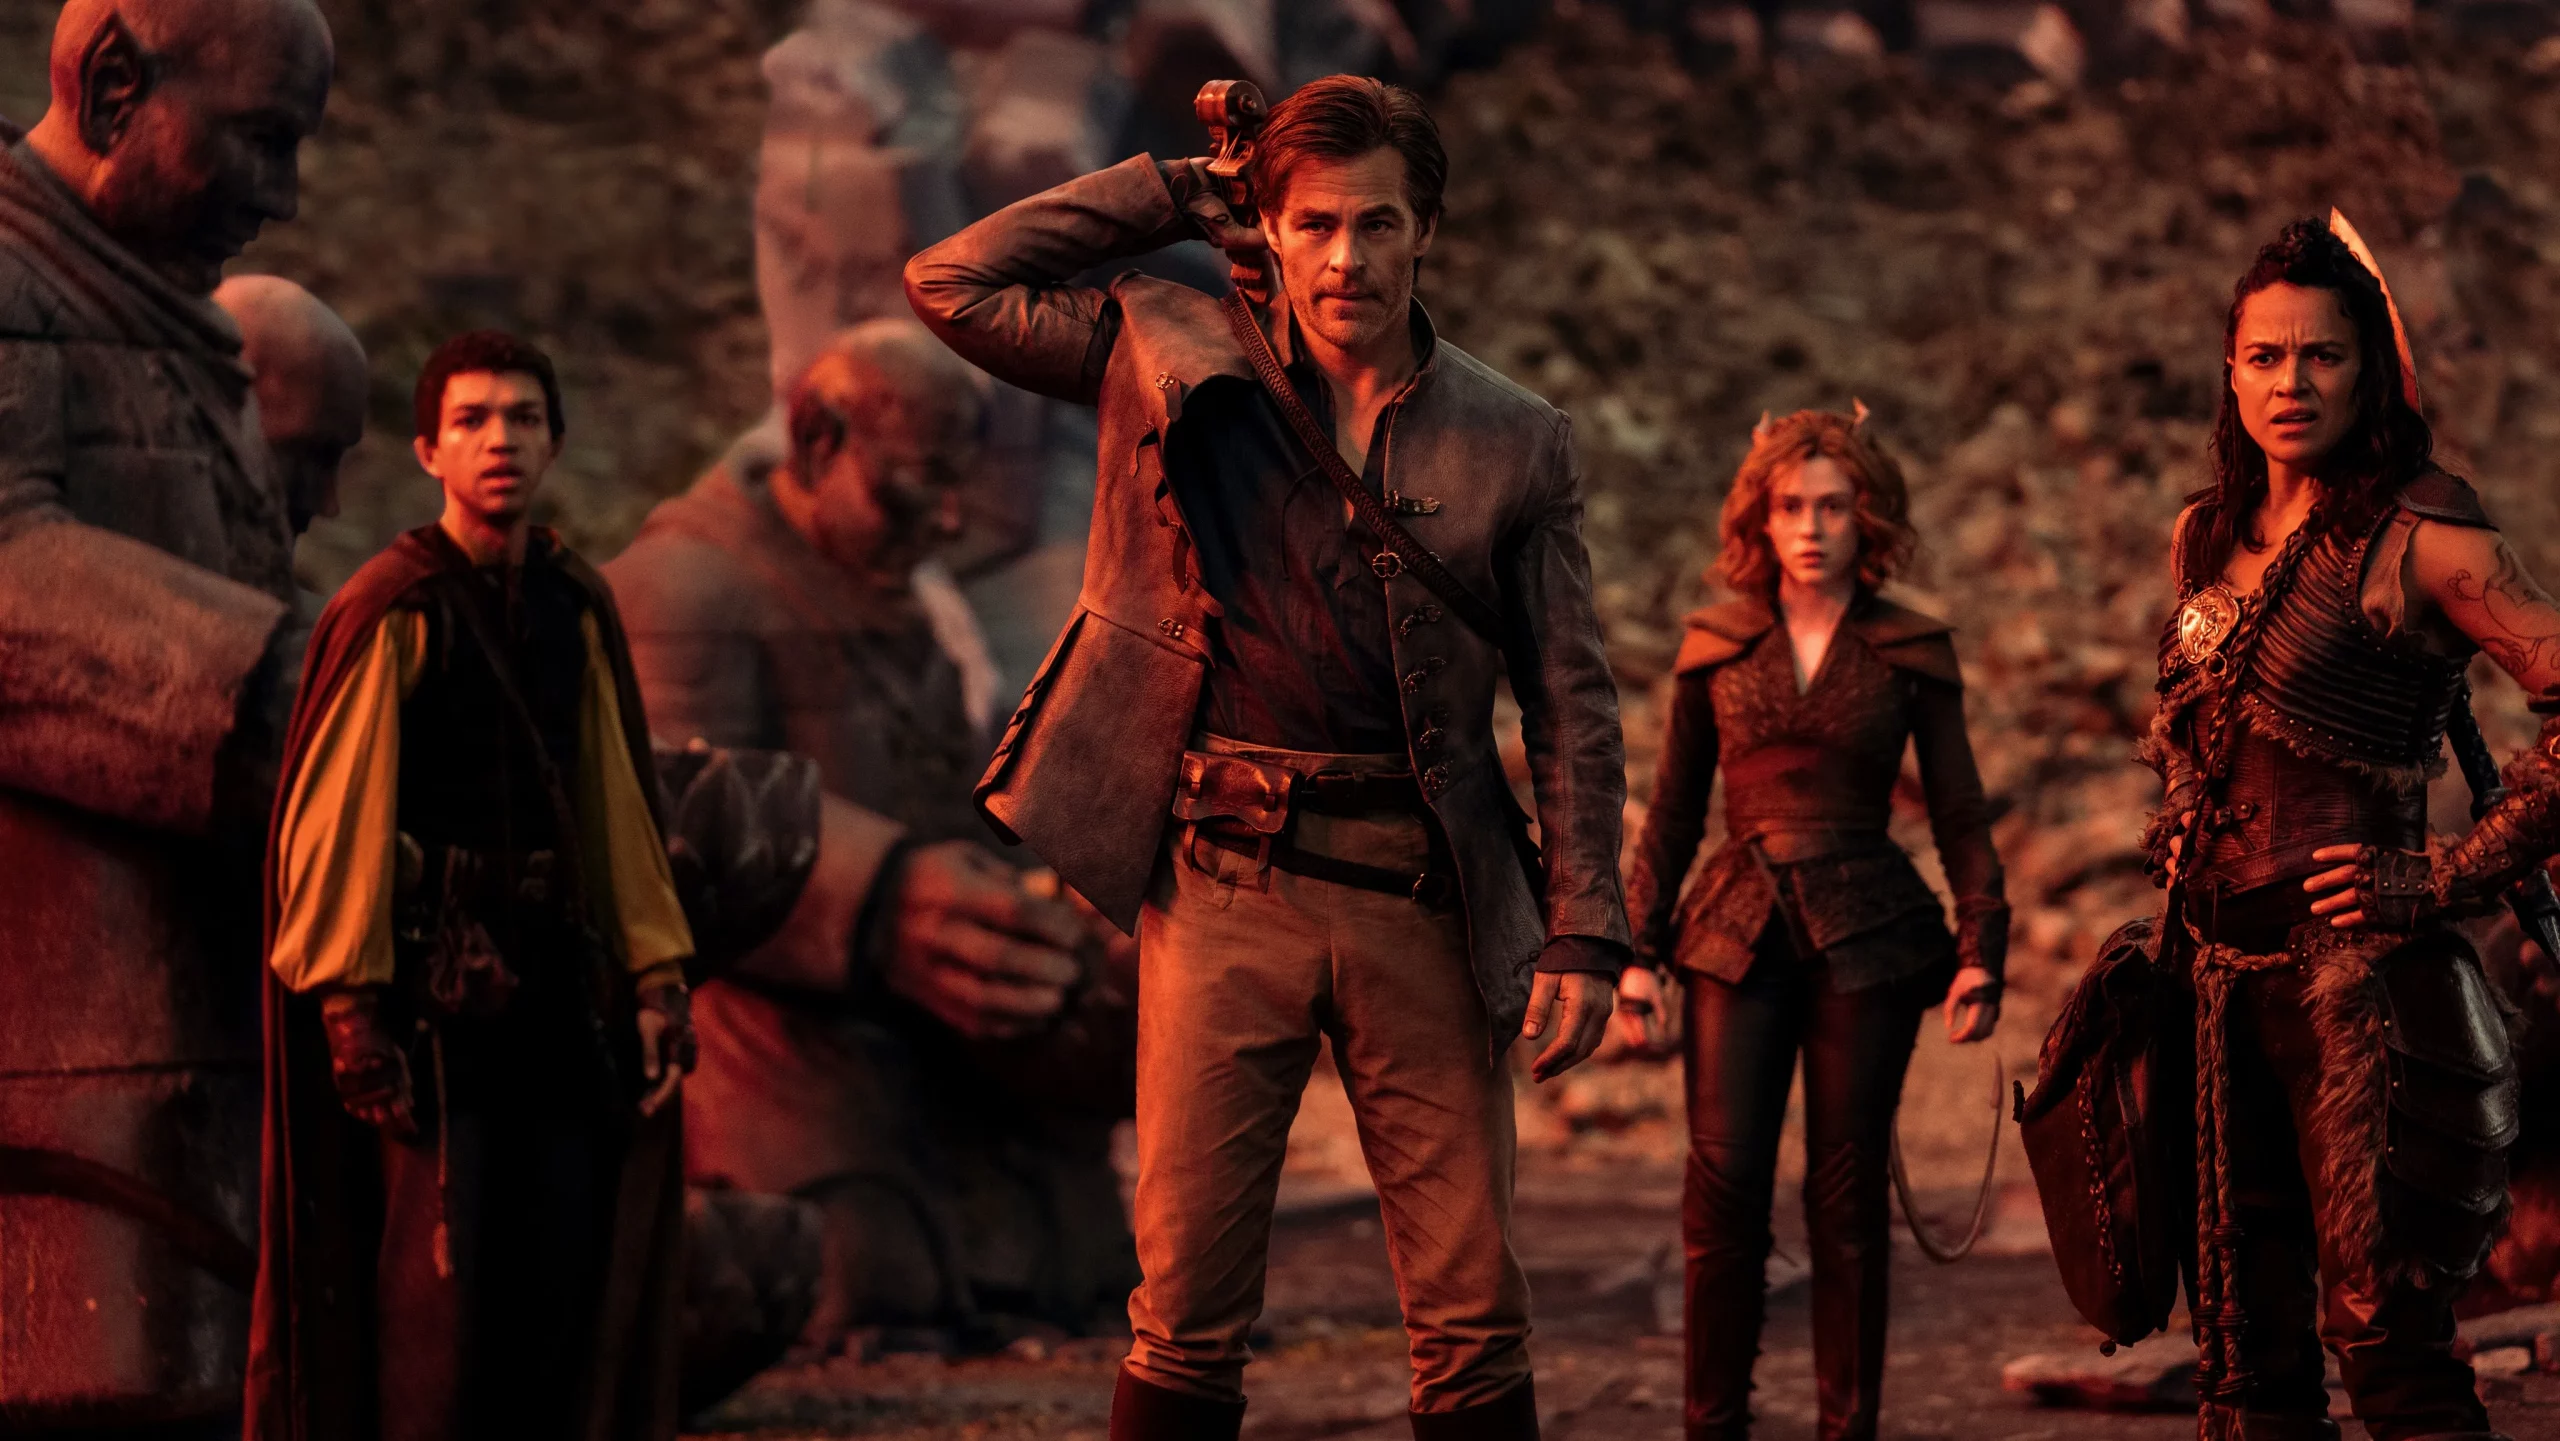 A group of adventurers stands looking toward the camera, altogether taking in a sight. They are bathed in a reddish sunset hue.